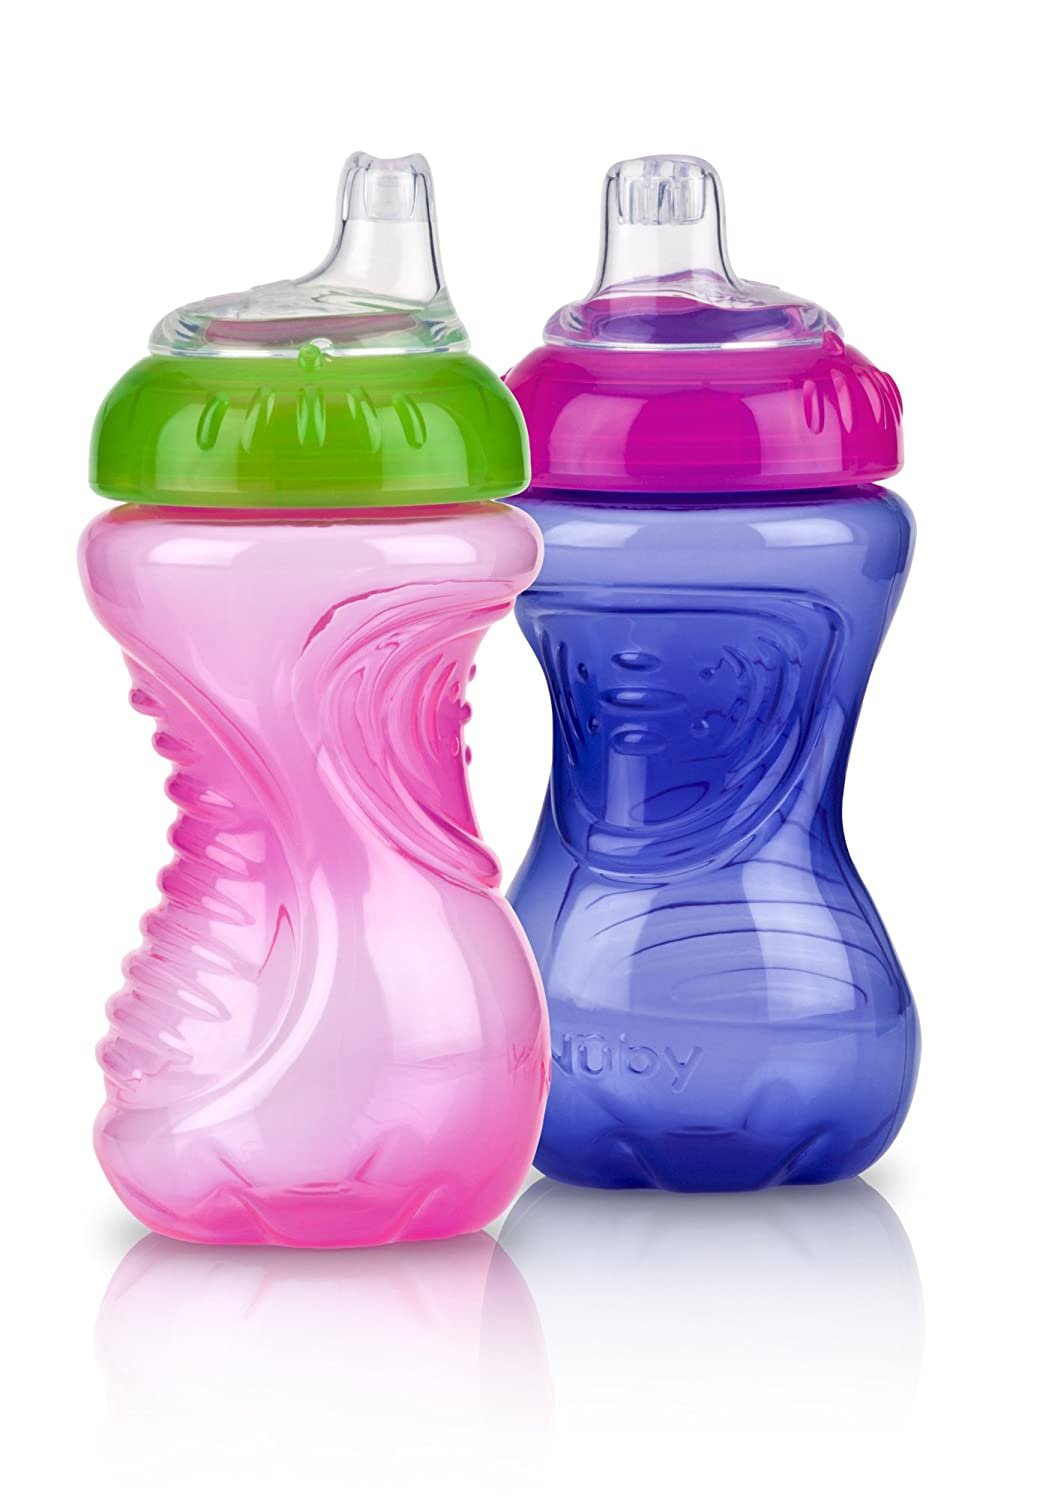 Nuby Sippy Cup